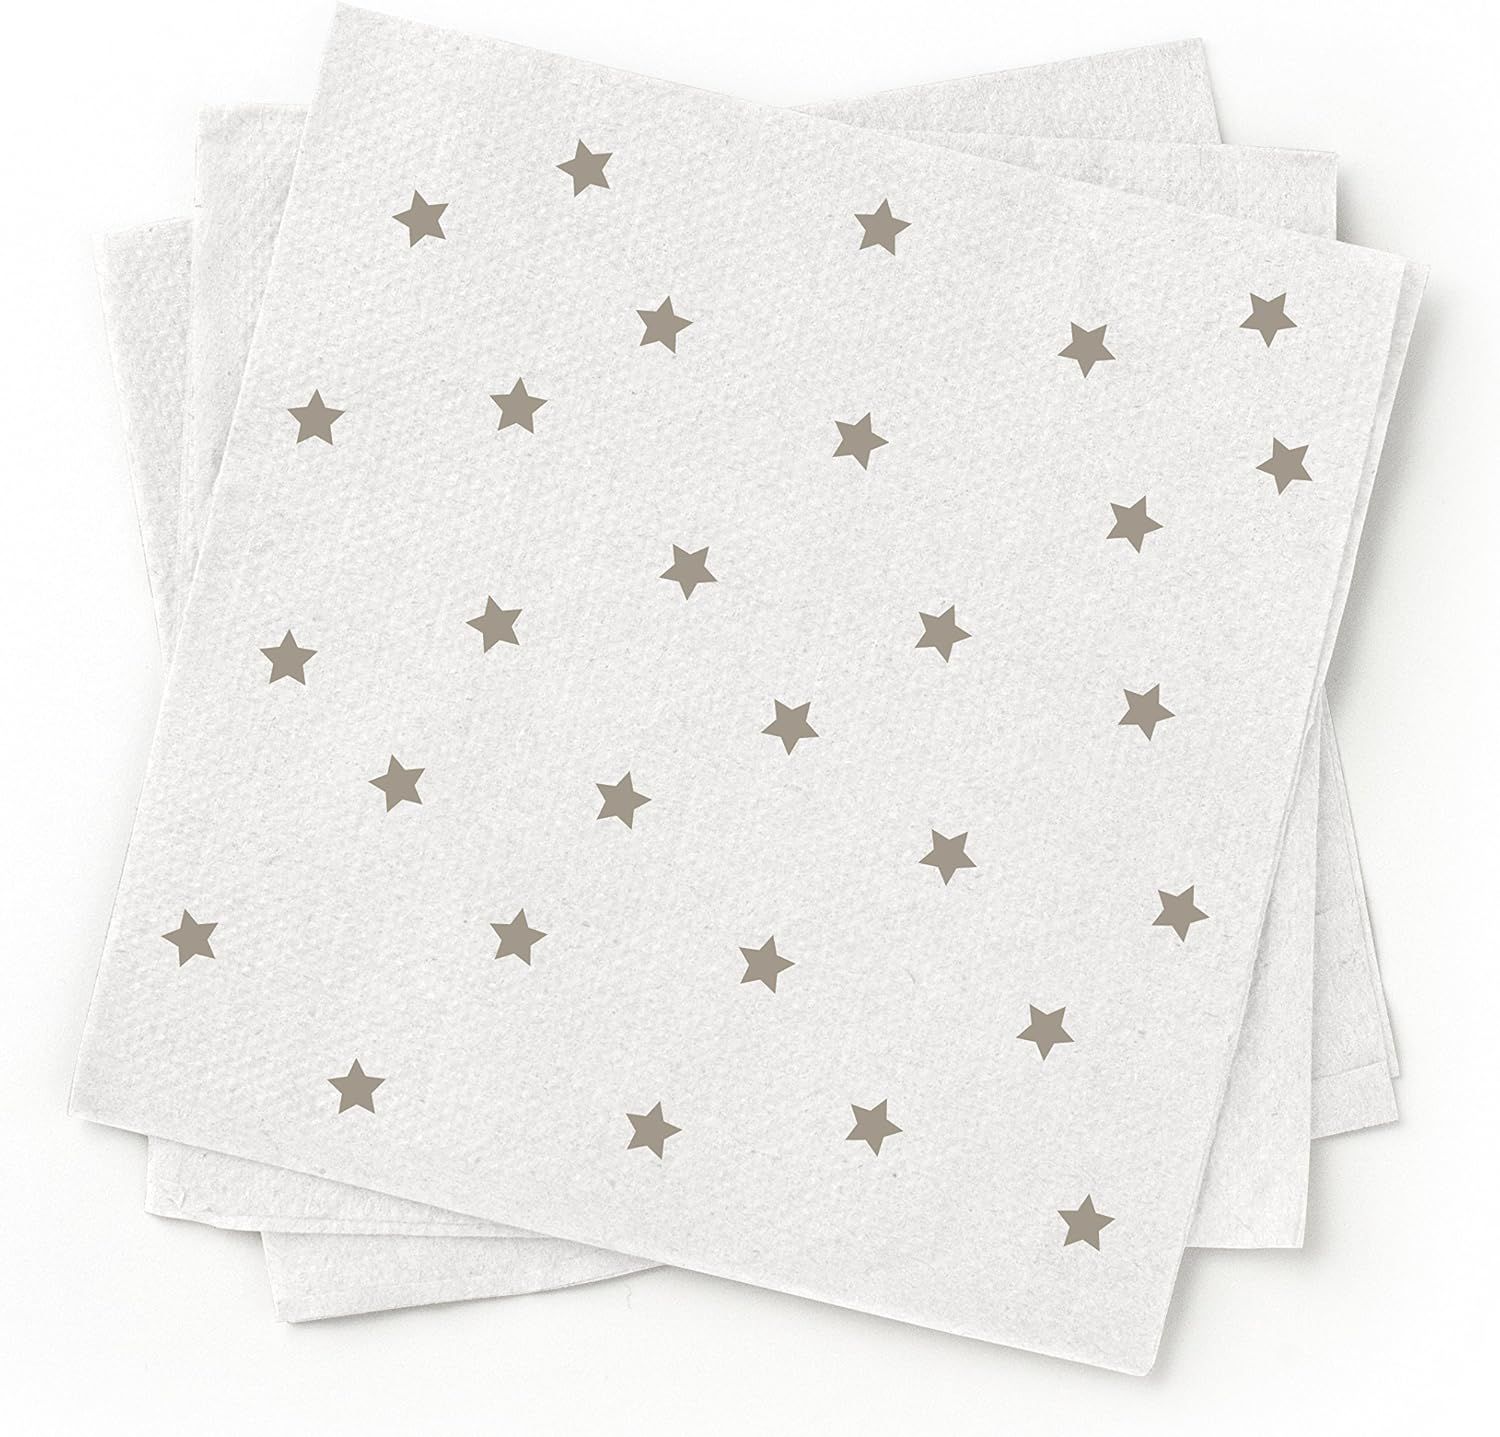 Susty Party SPNPCTGRY Napkins, Pack of 200, silver, grey, white | Amazon (US)